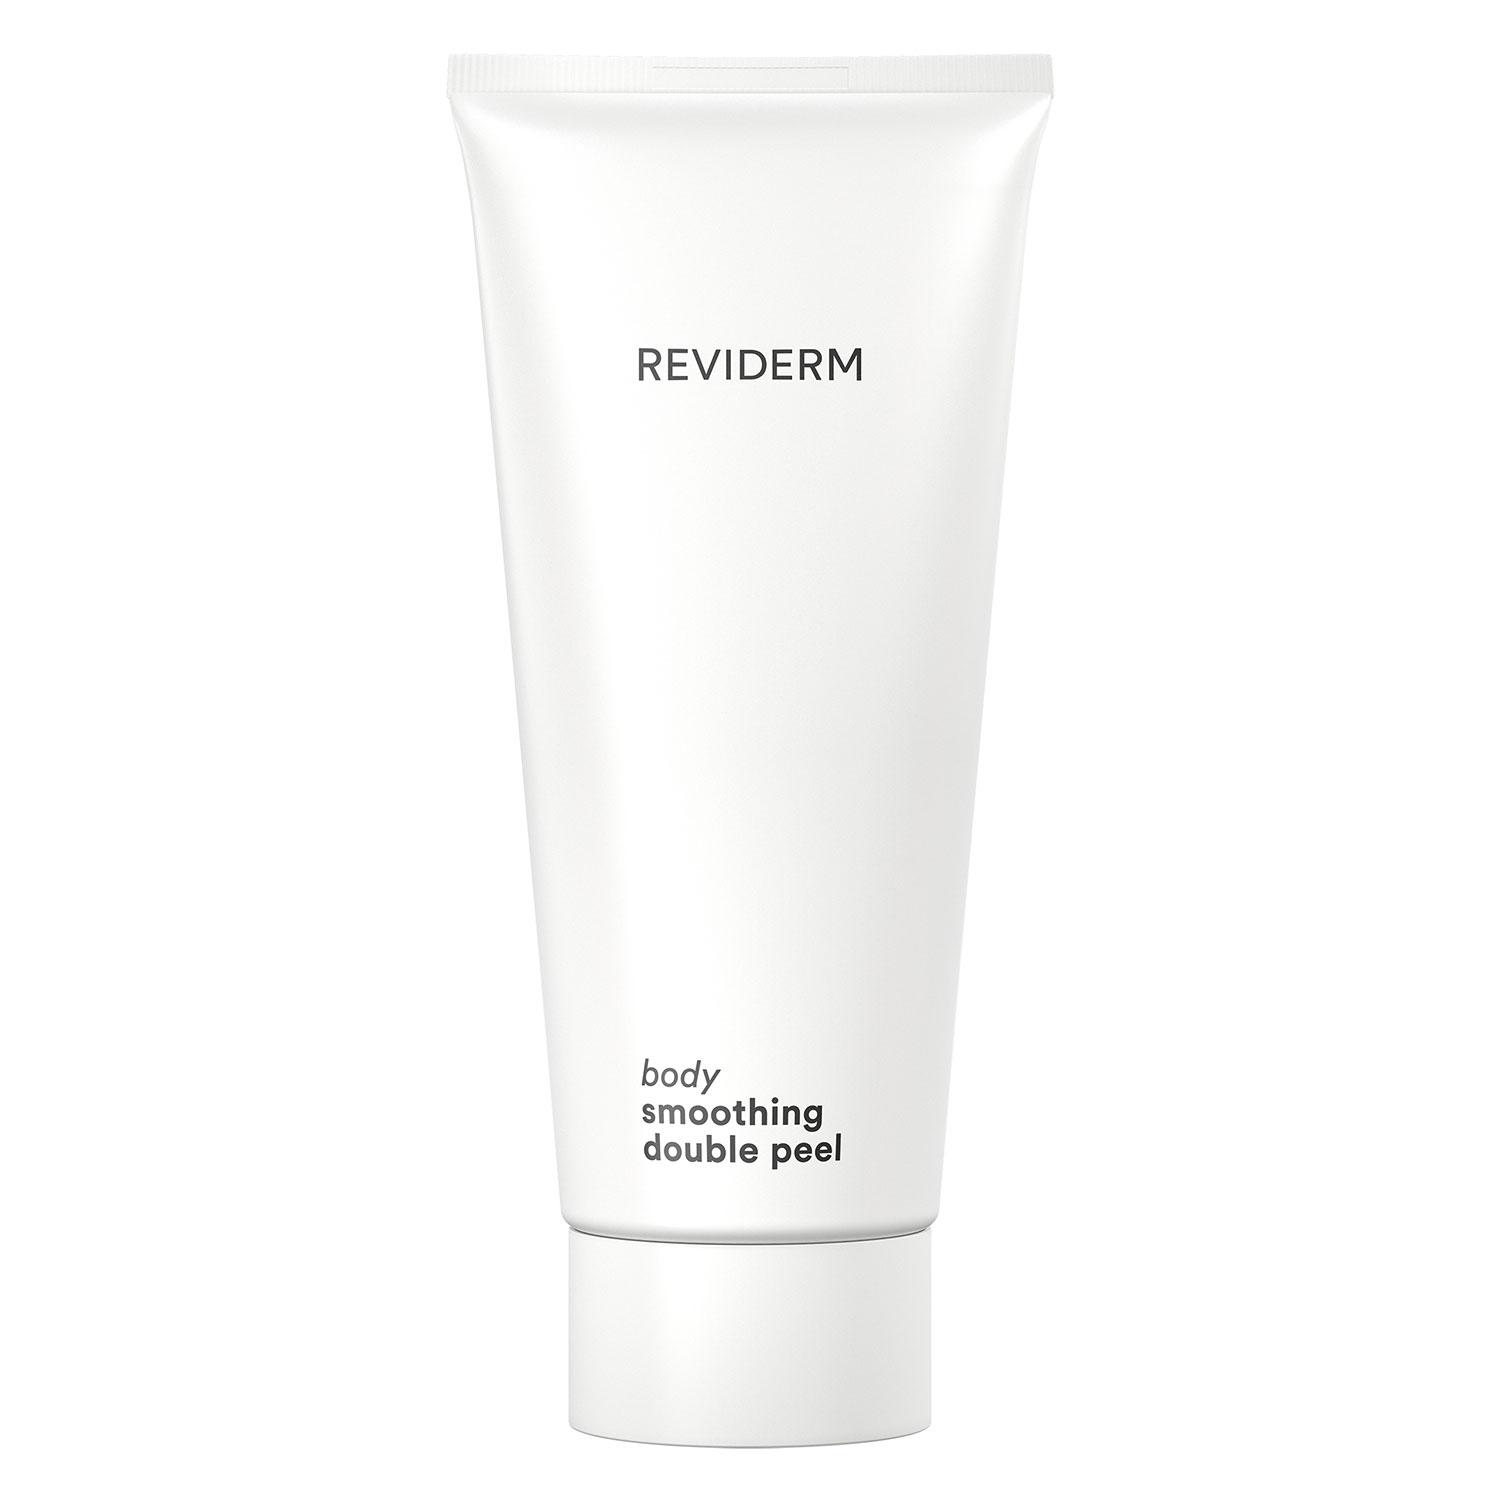 Reviderm Body Care - smoothing double peel